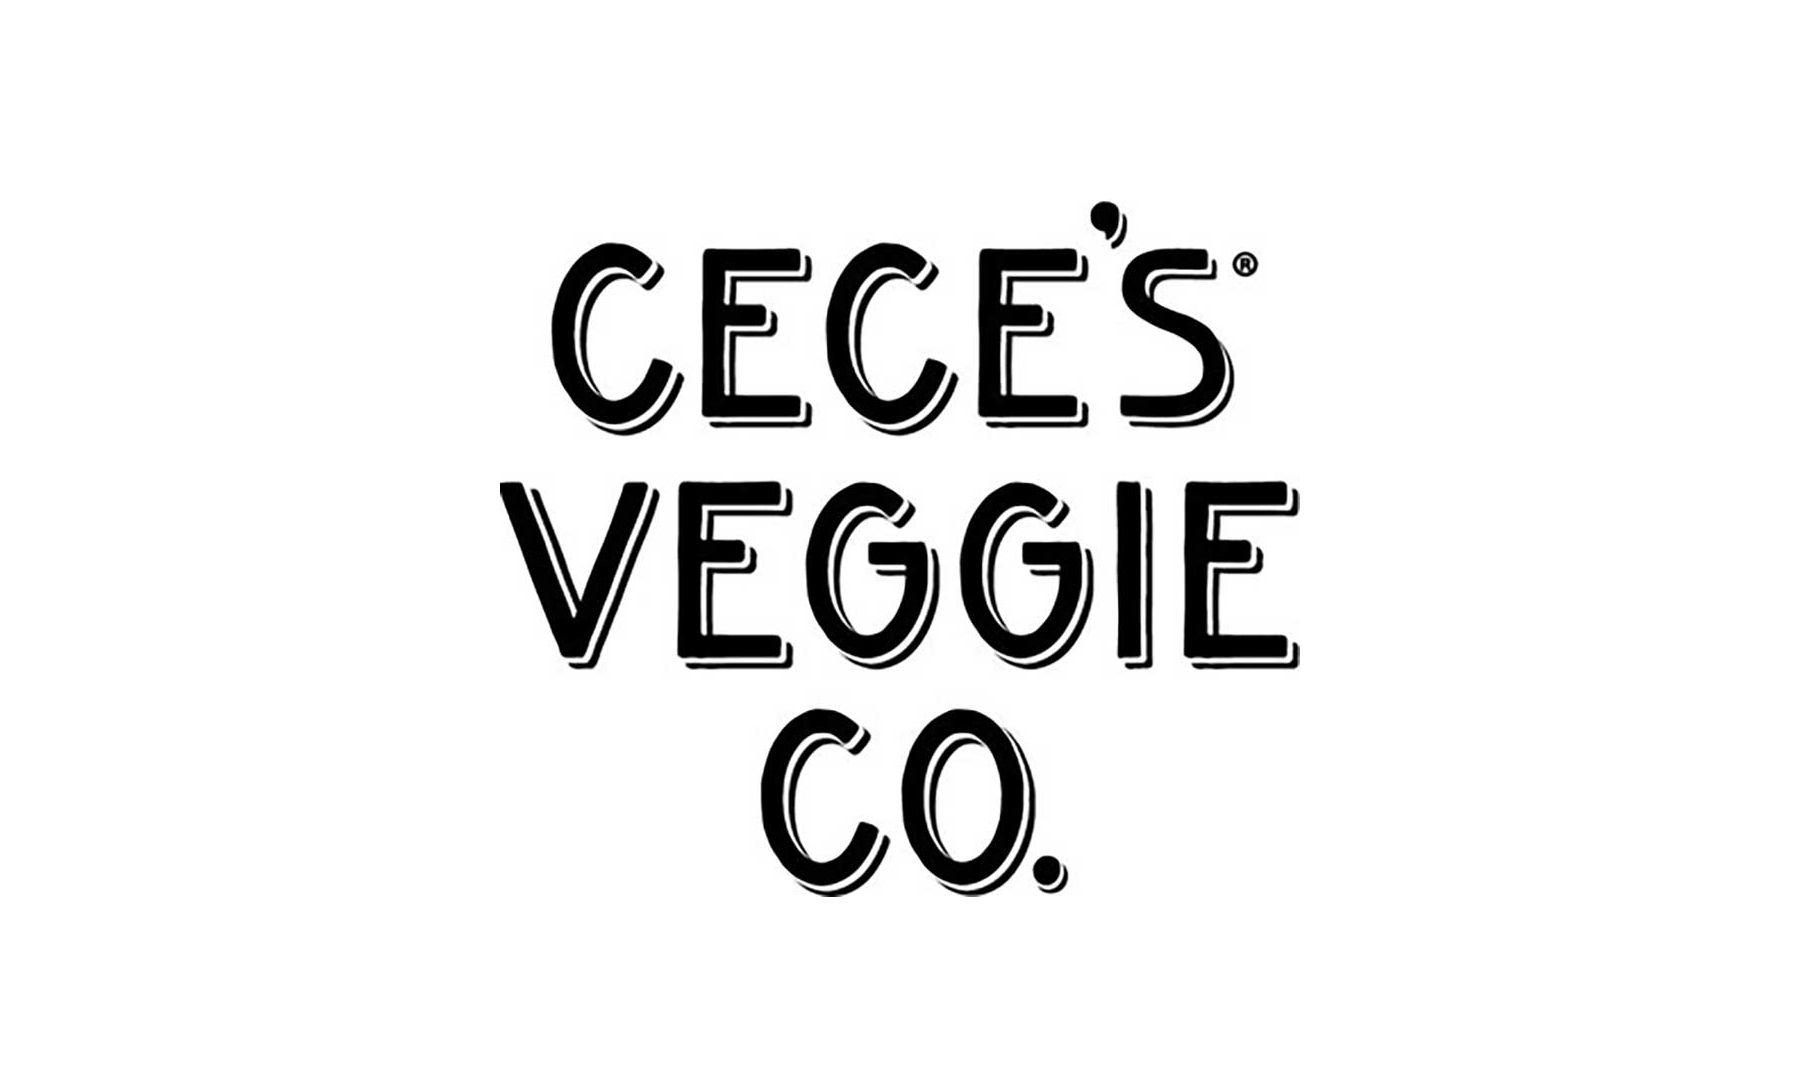 FoodsCo Logo - Former Whole Foods Co CEO Investing In Cece's Veggie Co